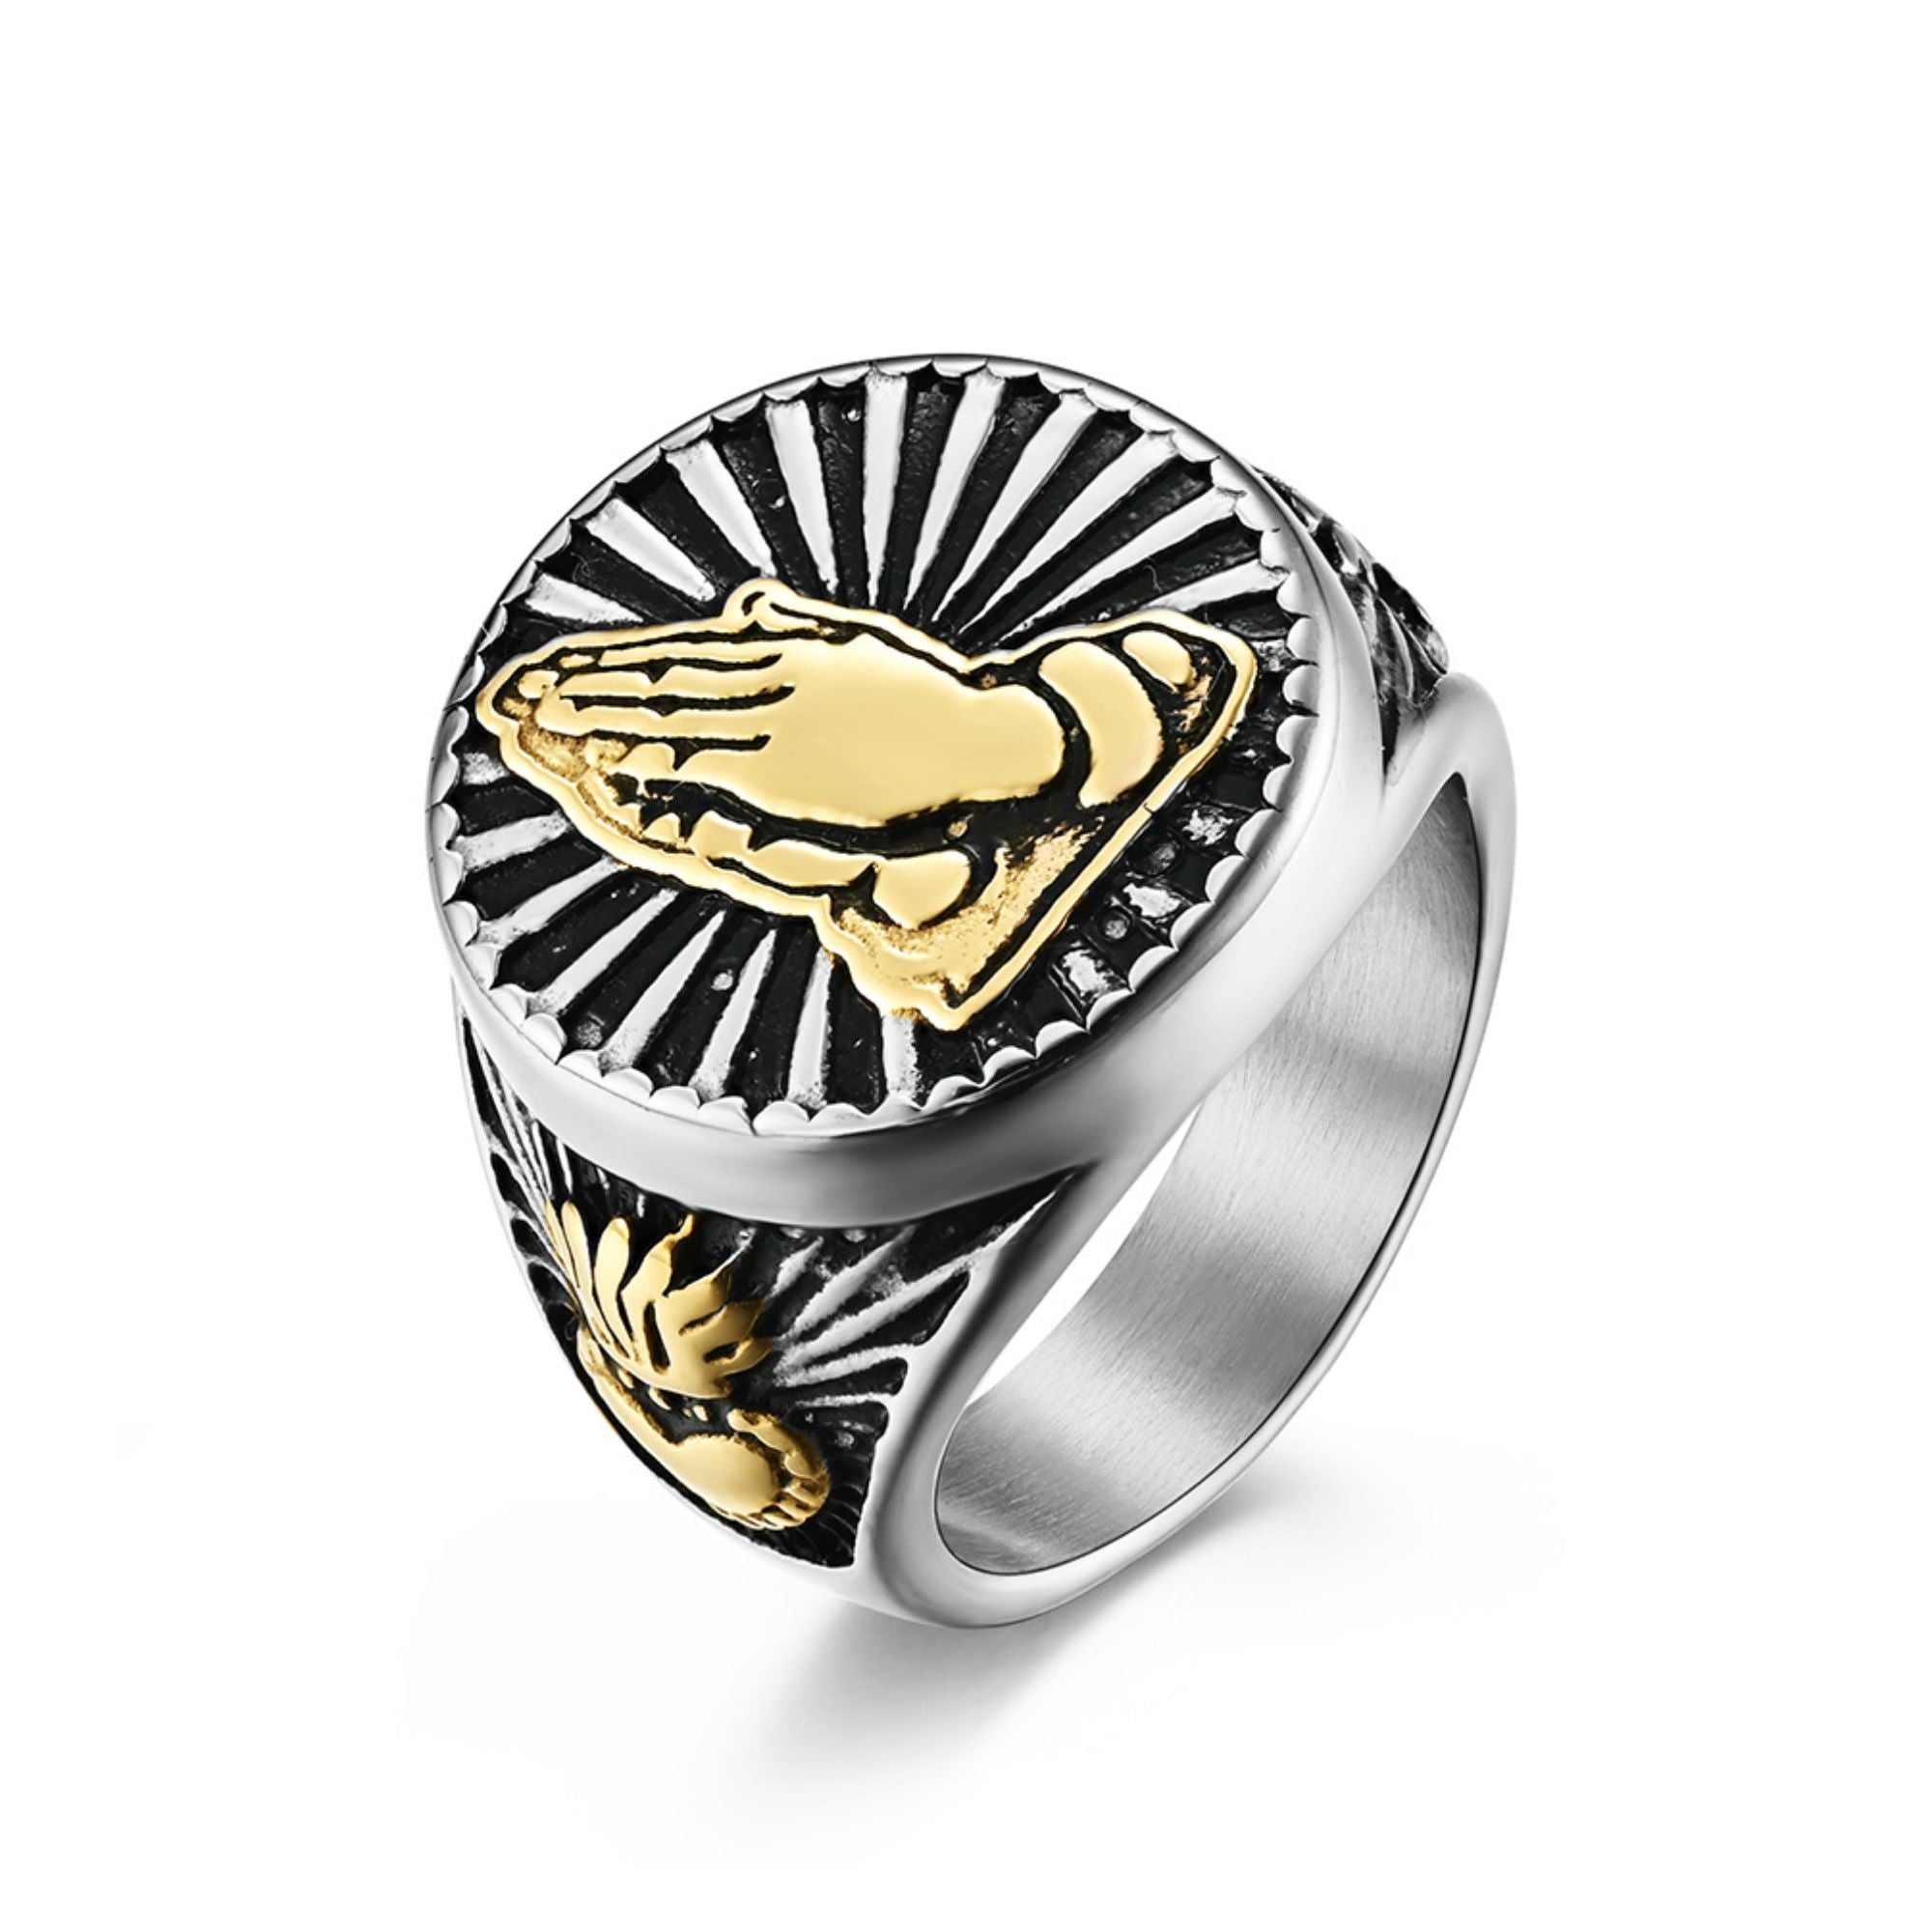 Prayer Hands Stainless Steel Ring - Silver or Gold Tone Color: Silver Size: 8 Jesus Passion Apparel